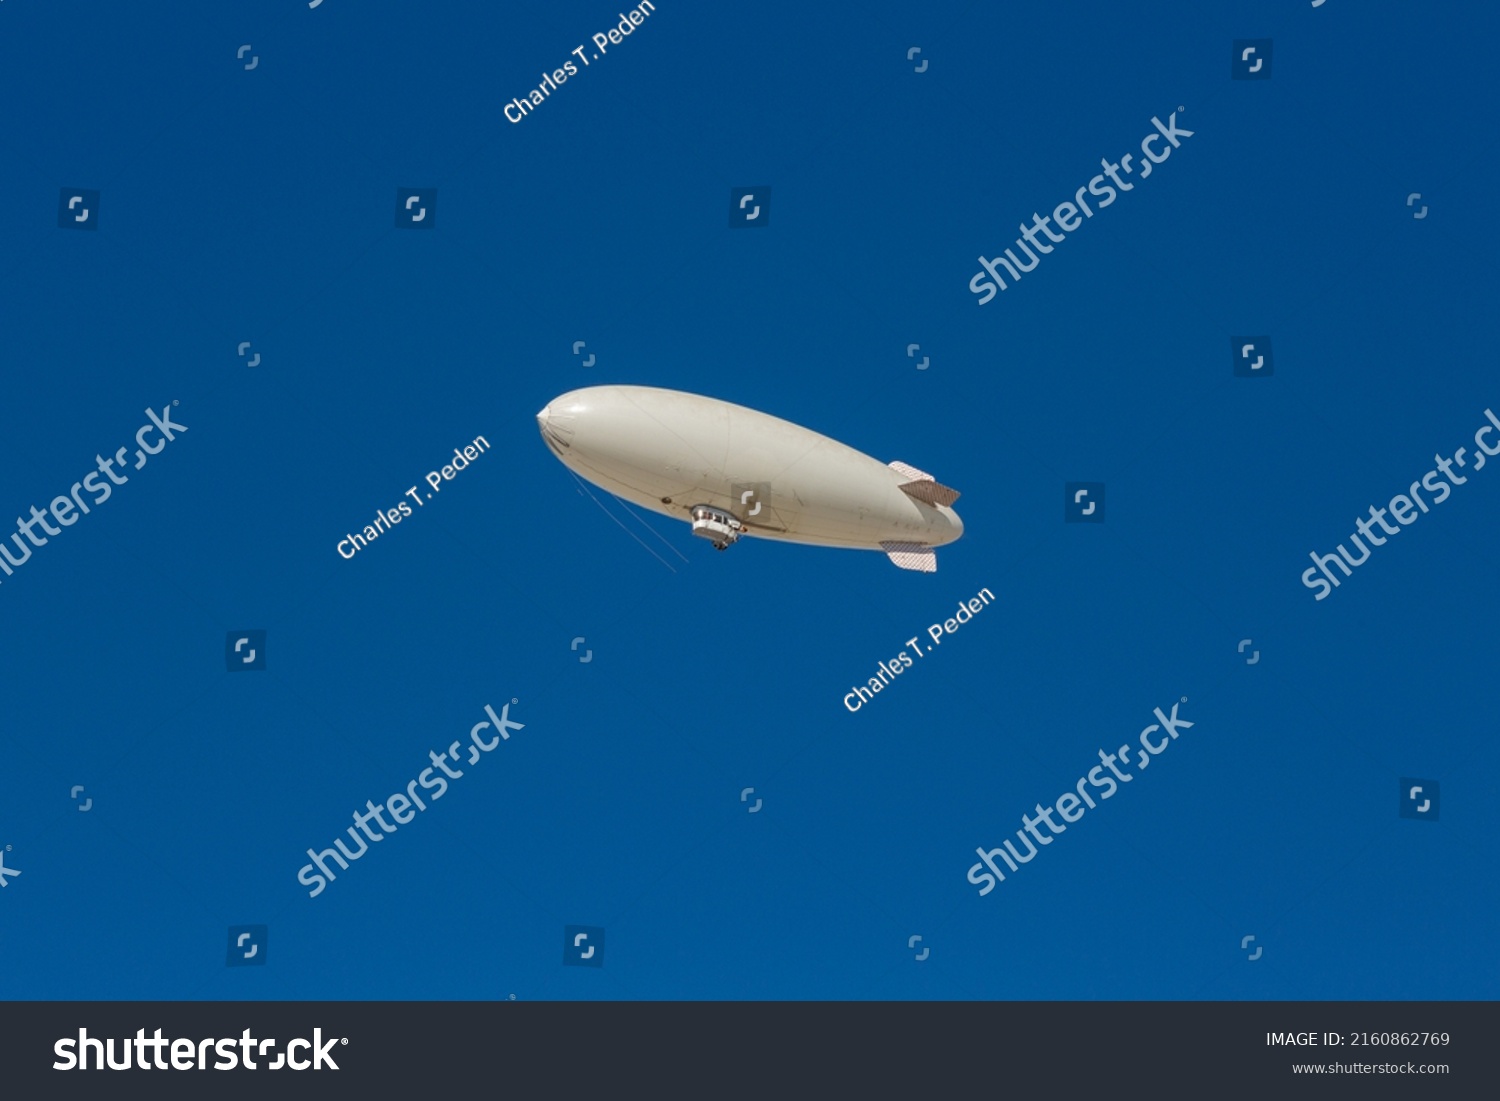 A white blimp, airship, or dirigible flying in blue sky. Close up detail of an unmarked zeppelin like flying vehicle. Flying high above in clear skies.   #2160862769